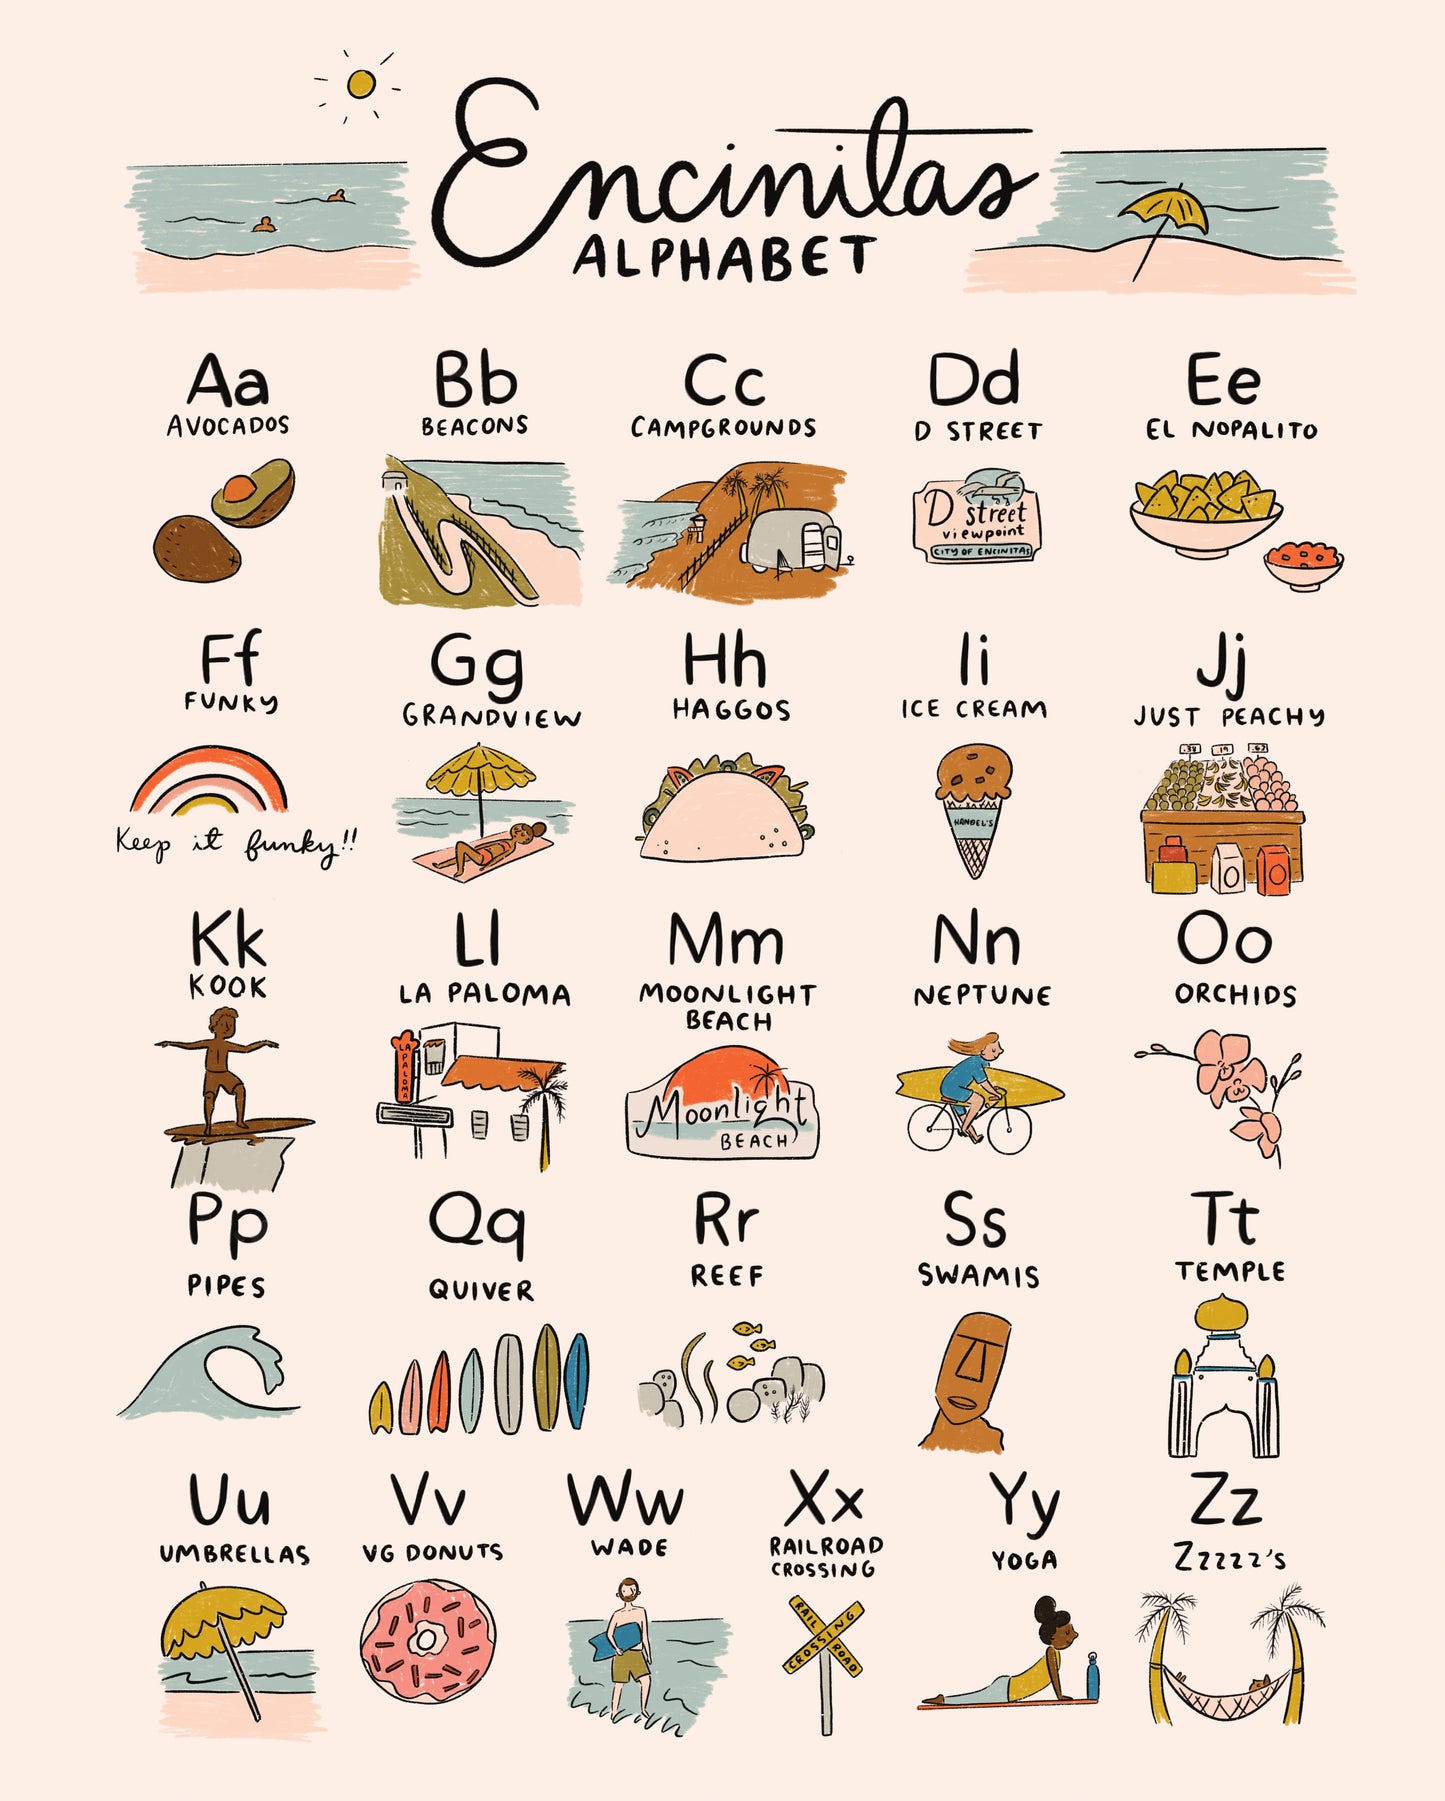 Hand drawn by Abbie Paulhus, this Encinitas alphabet print features local favorites and is sold by Thread Spun